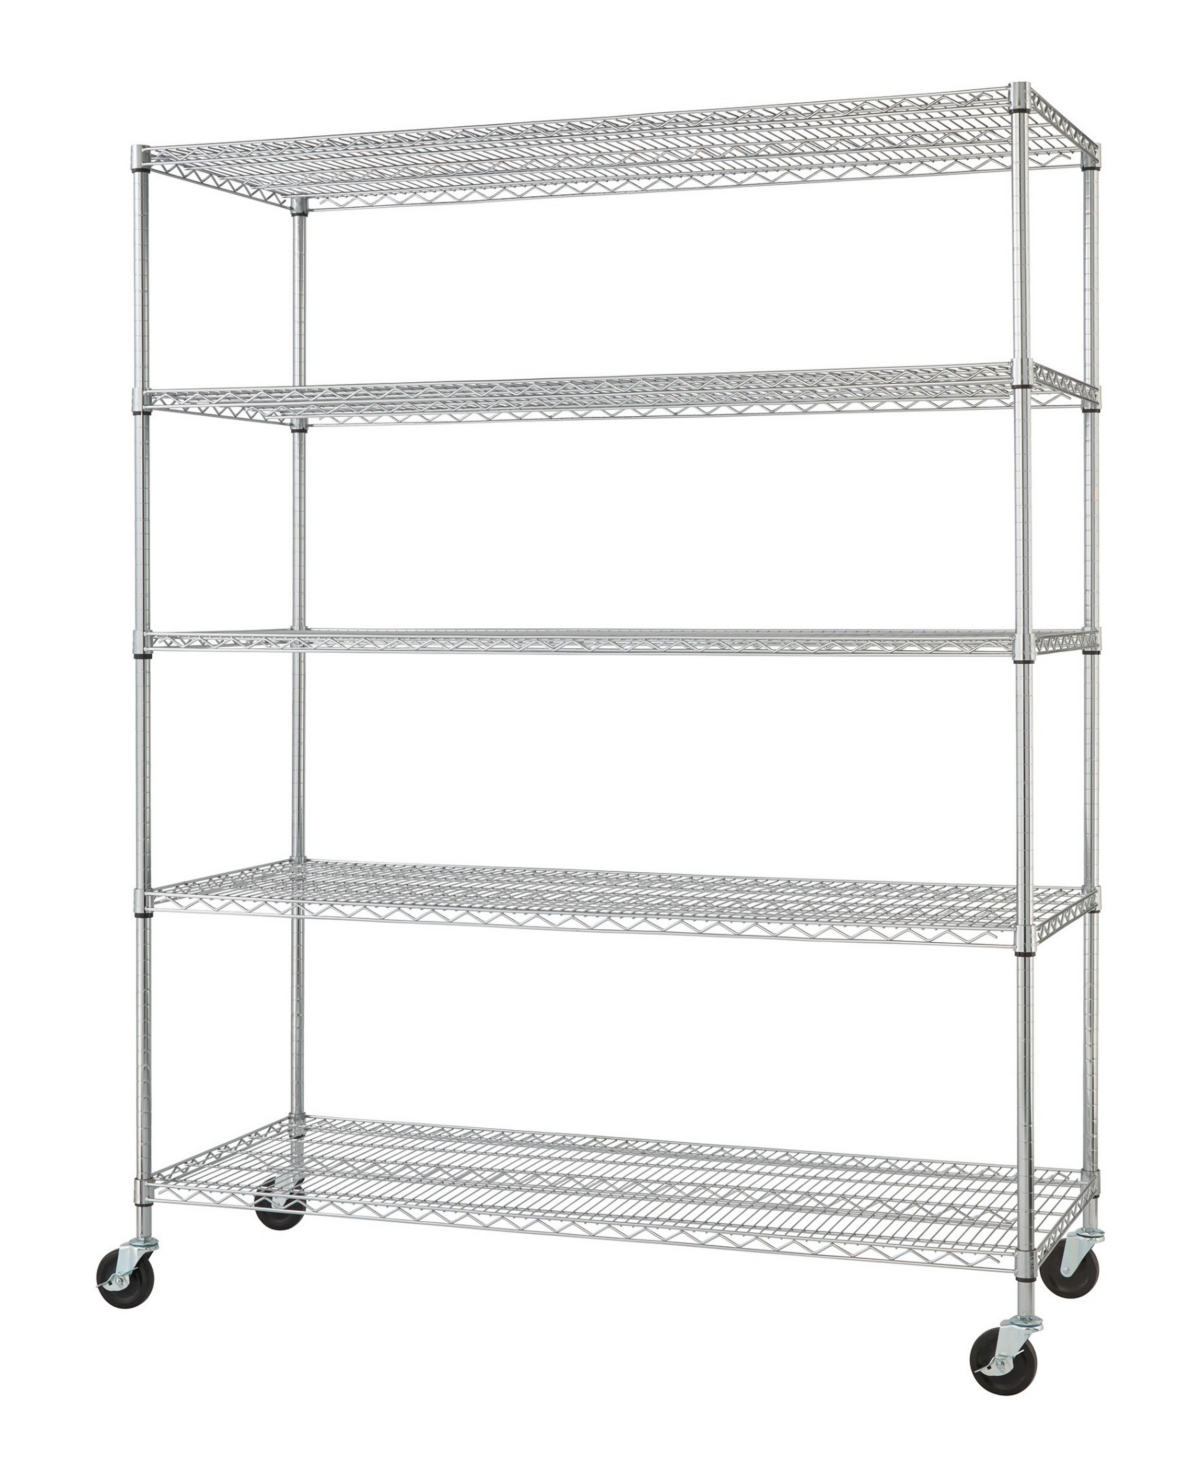 5-Tier Heavy Duty Wire Shelving Rack with Nsf Includes Wheels - Chrome